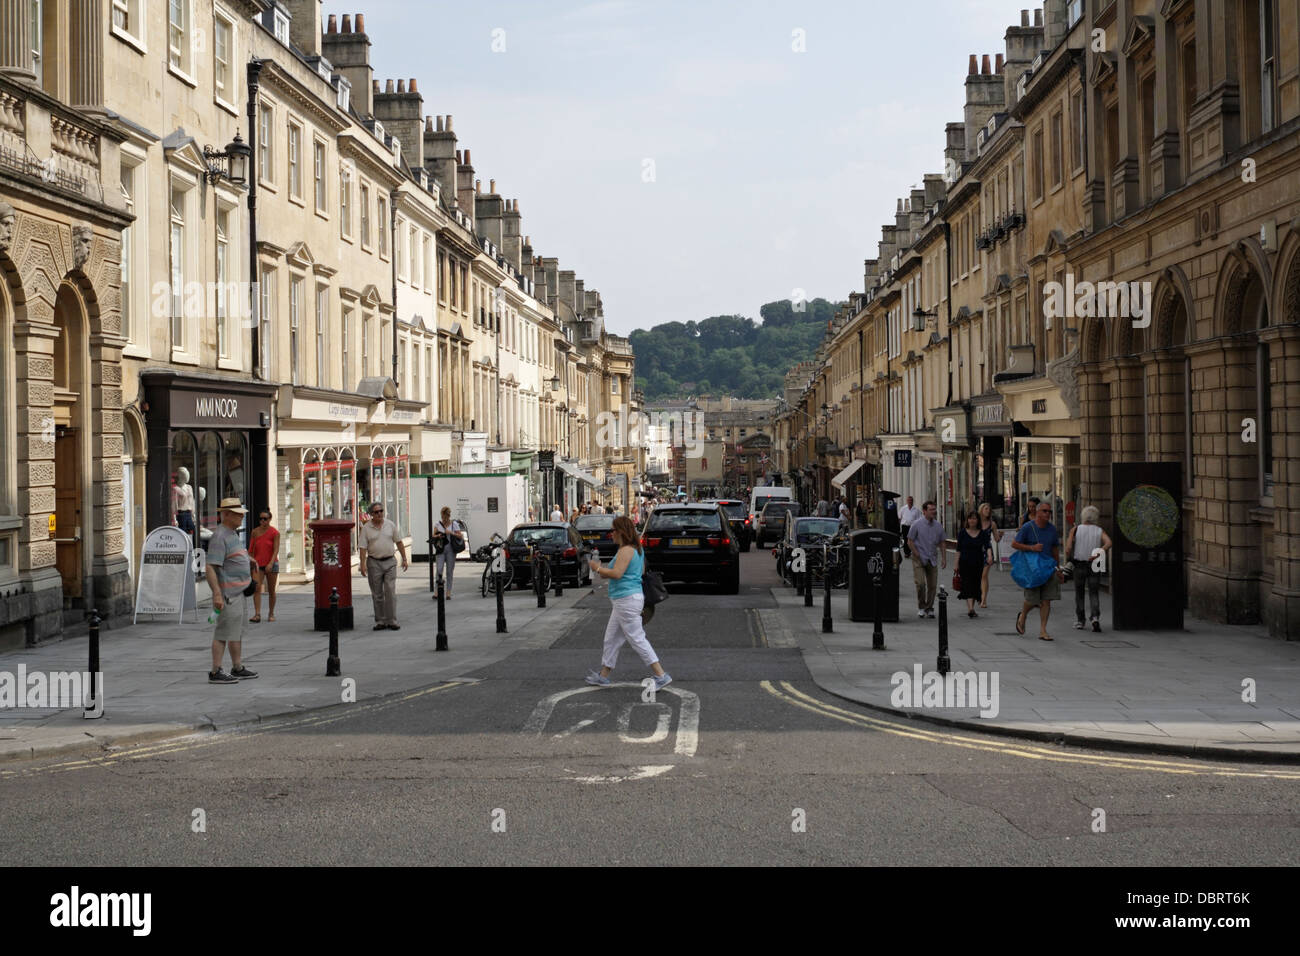 Looking down Milsom St in the centre of Bath city centre England, streetscape Stock Photo